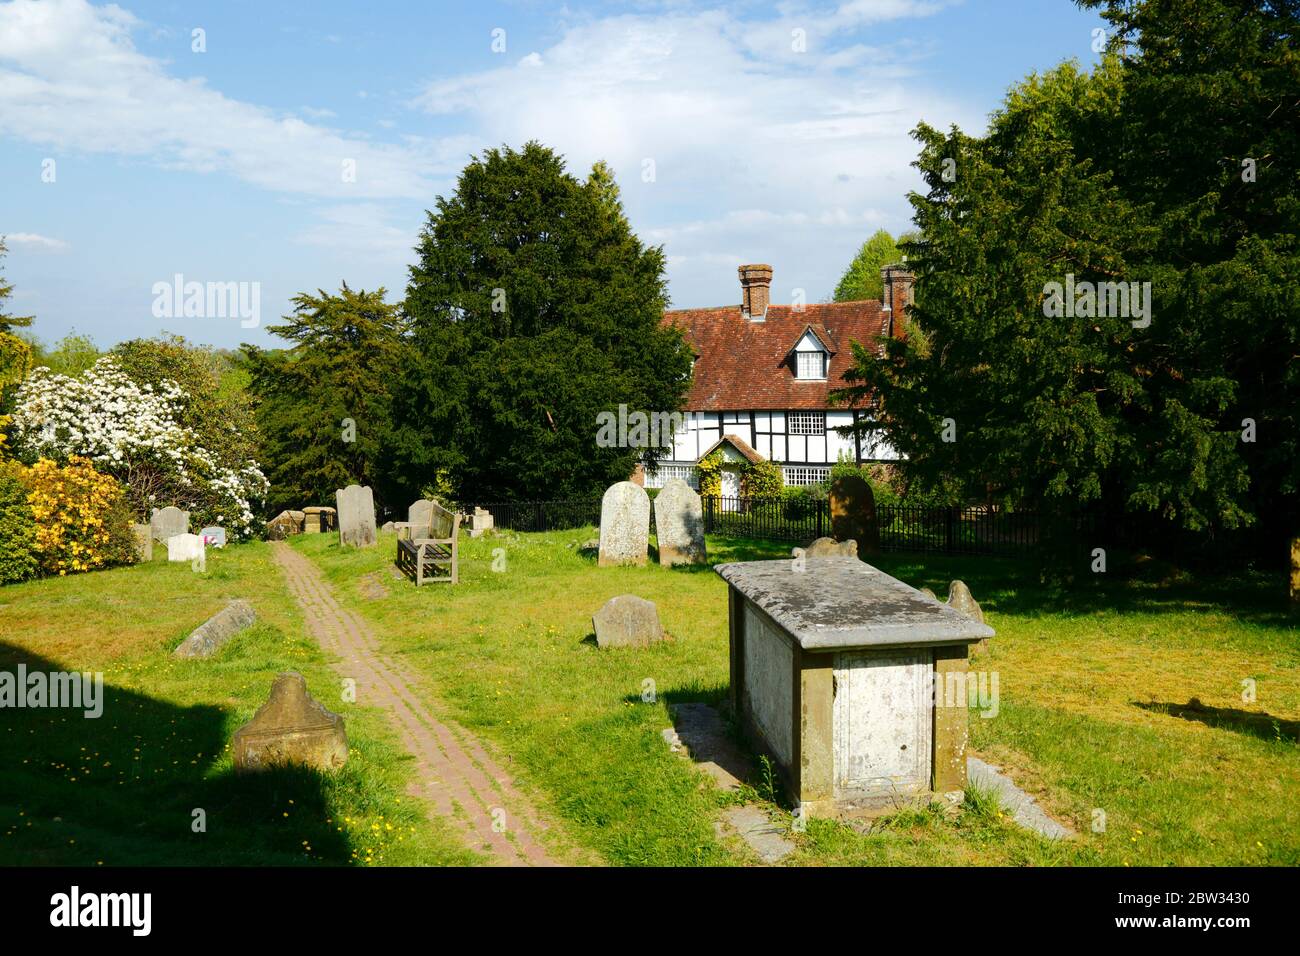 Quaint traditional white timber framed house and gravestones in churchyard of parish church, Speldhurst, Kent, England Stock Photo